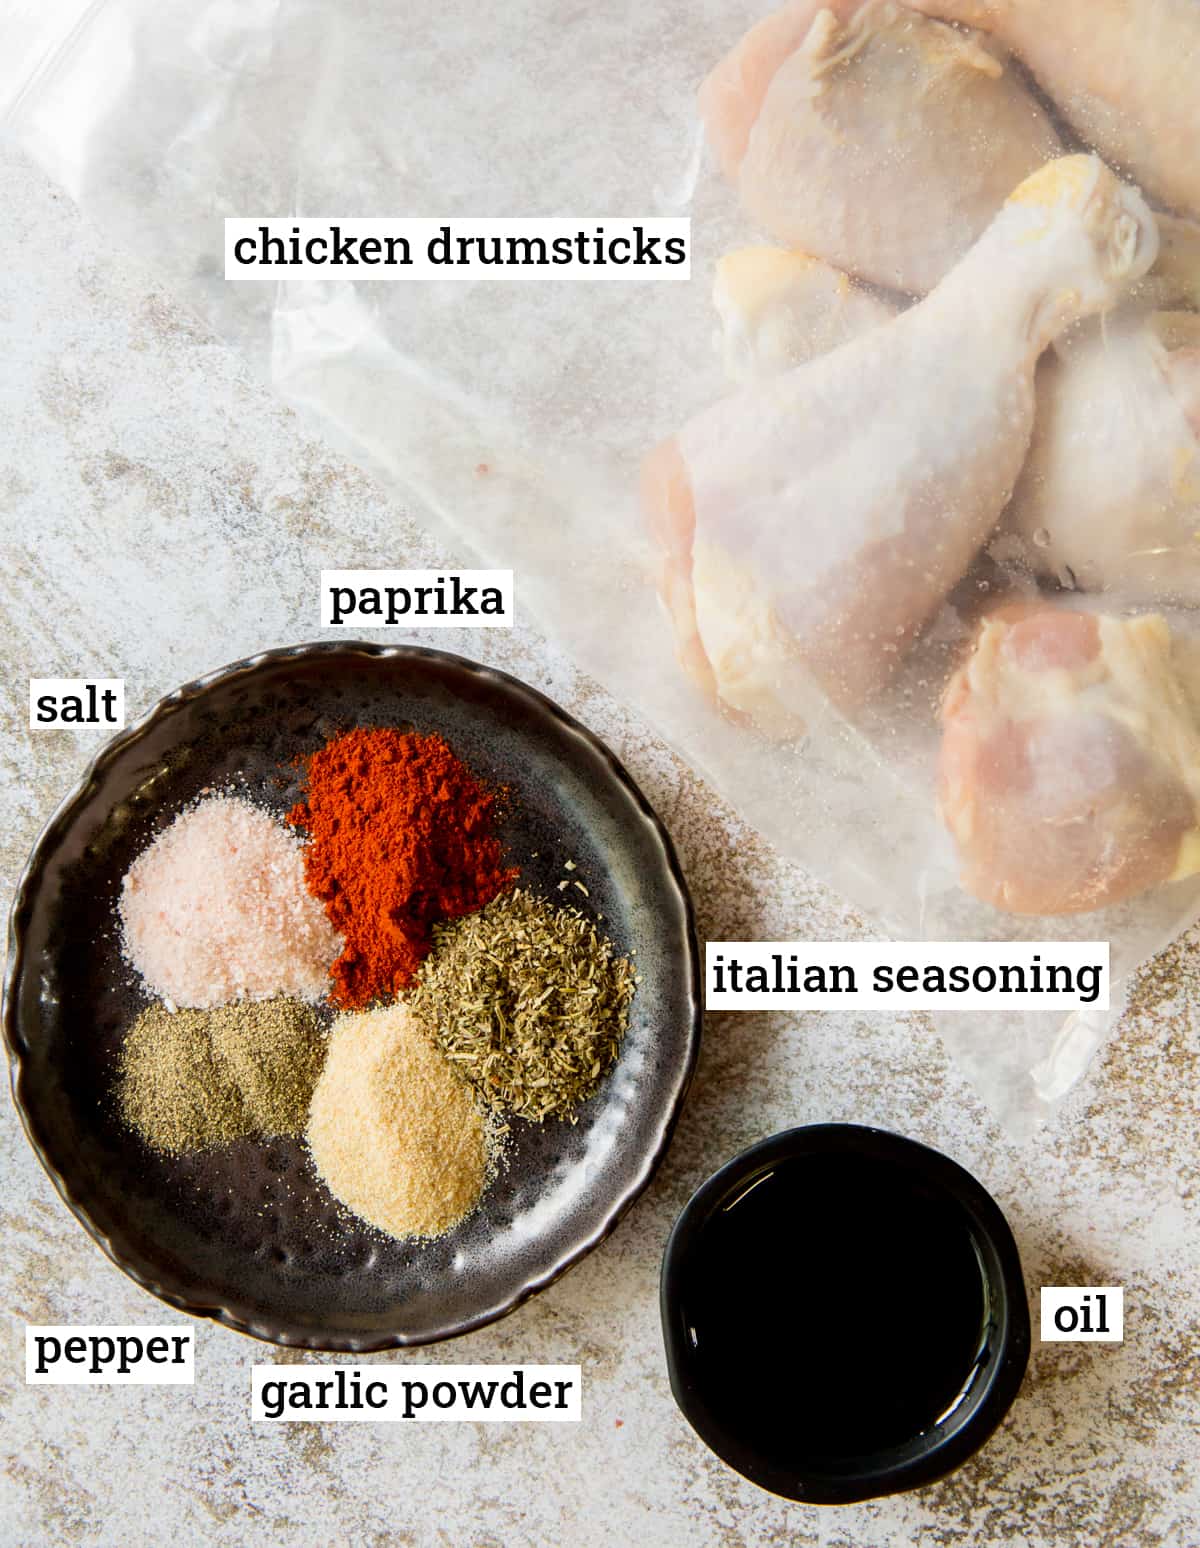 The ingredients for Air Fryer Chicken Drumsticks with text overlay.